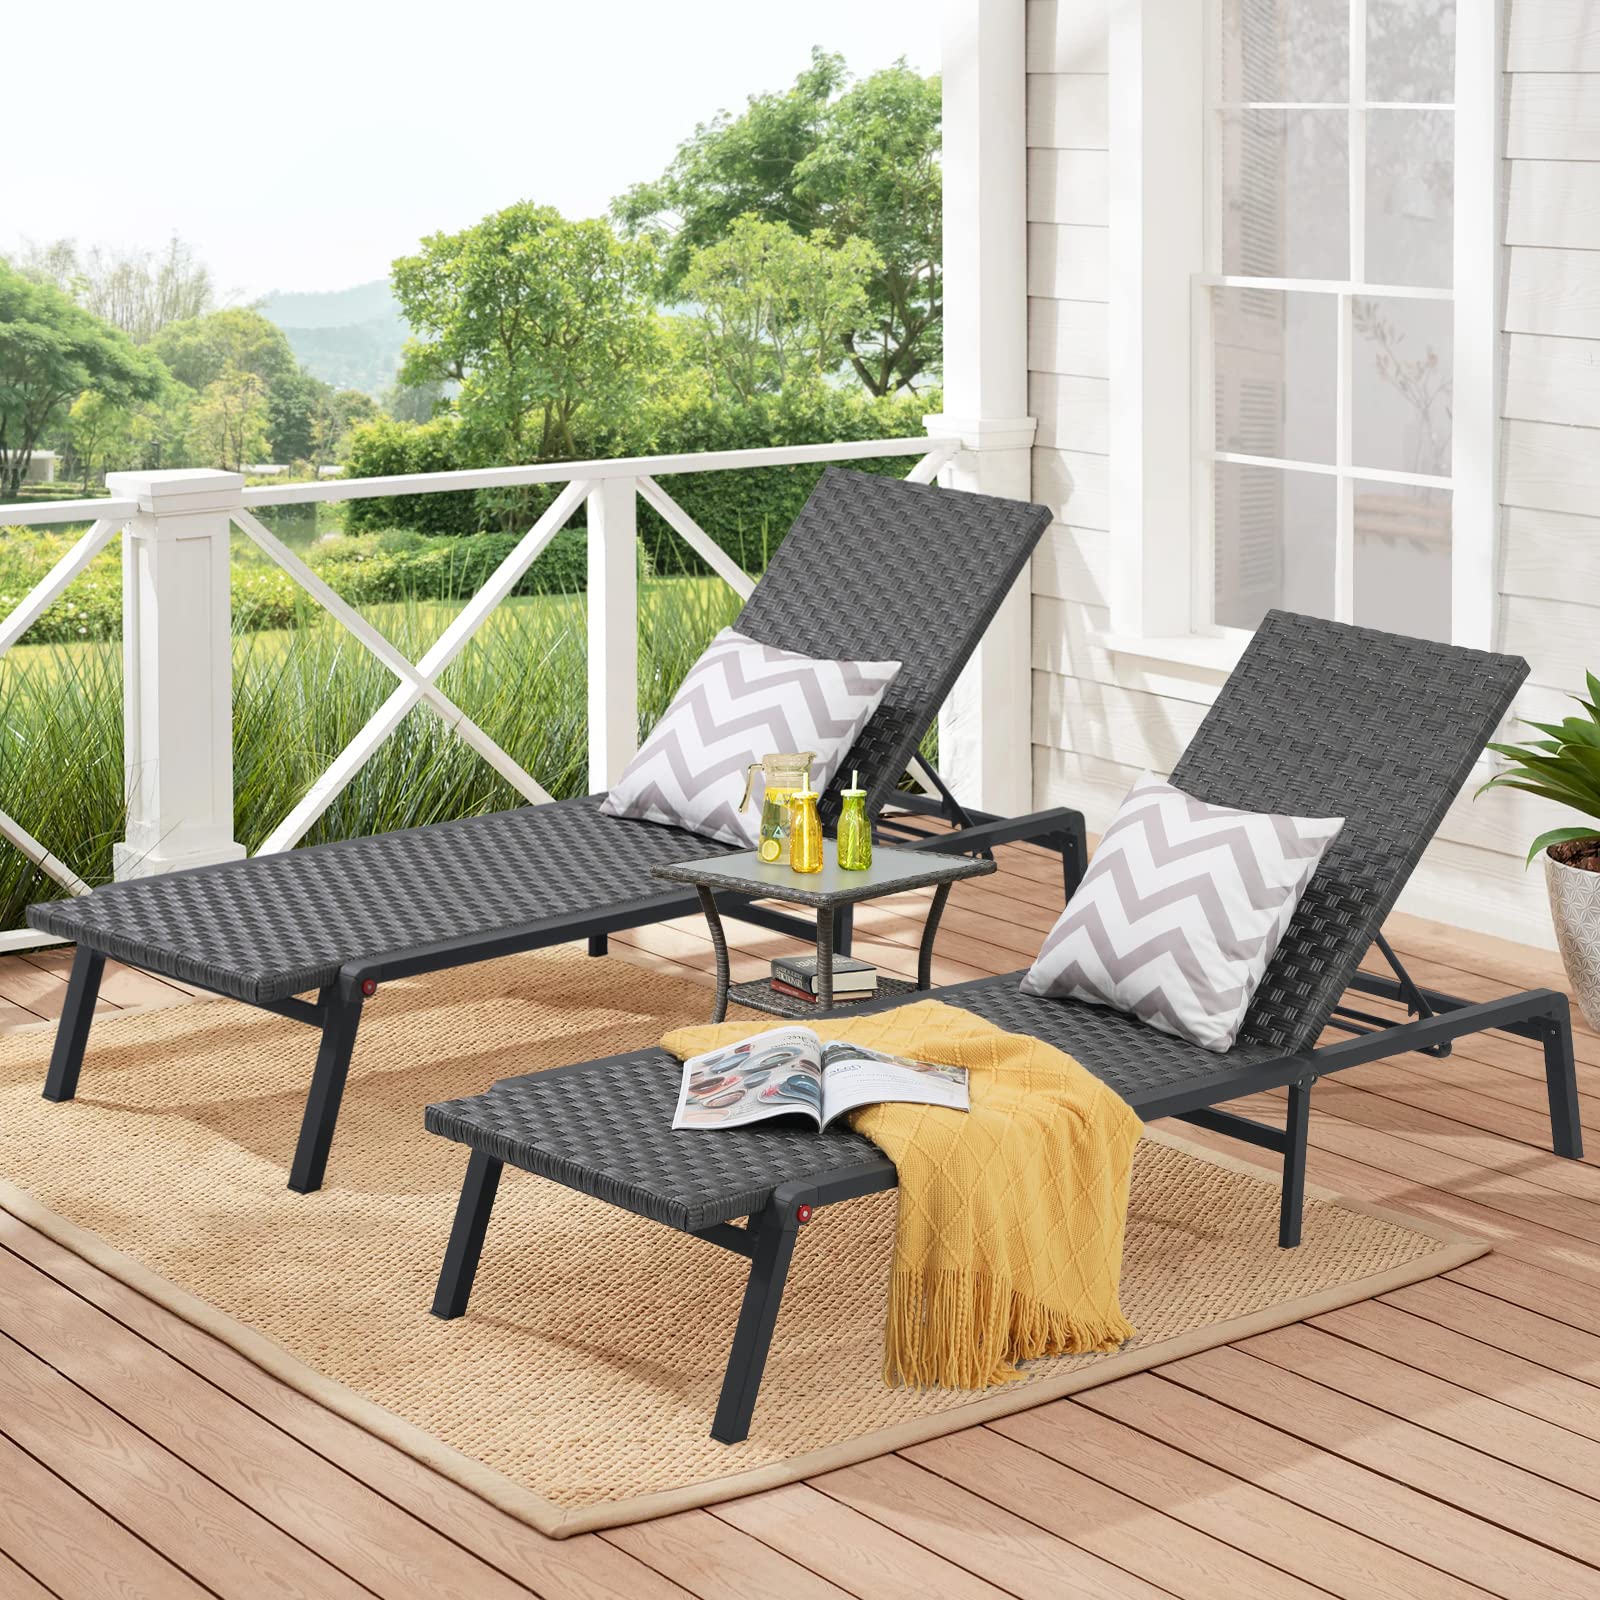 3 Pieces Outdoor Chaise Lounge Chair Set with Square Side Table, Adjustable 5-Position Folding Pool Lounge Chair, Patio Lounge Chair Set of 2 with Aluminum Frame, Grey - image 1 of 7